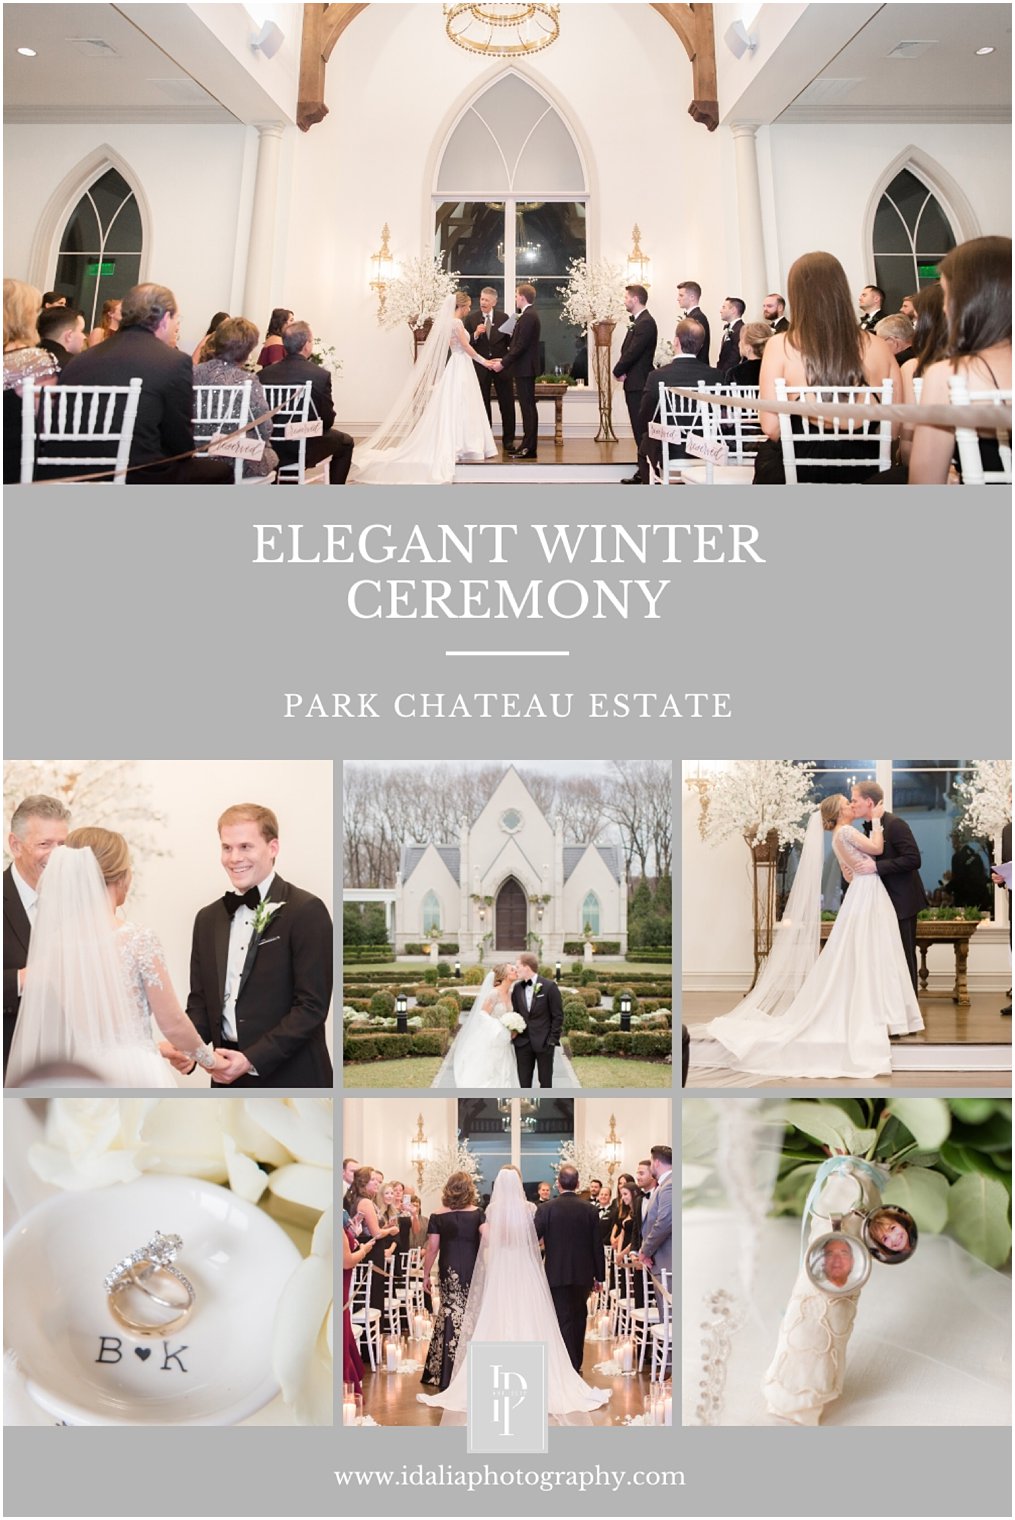 Check out this winter ceremony in the beautiful chapel at Park Chateau Estate and Gardens | Photos by Idalia Photography